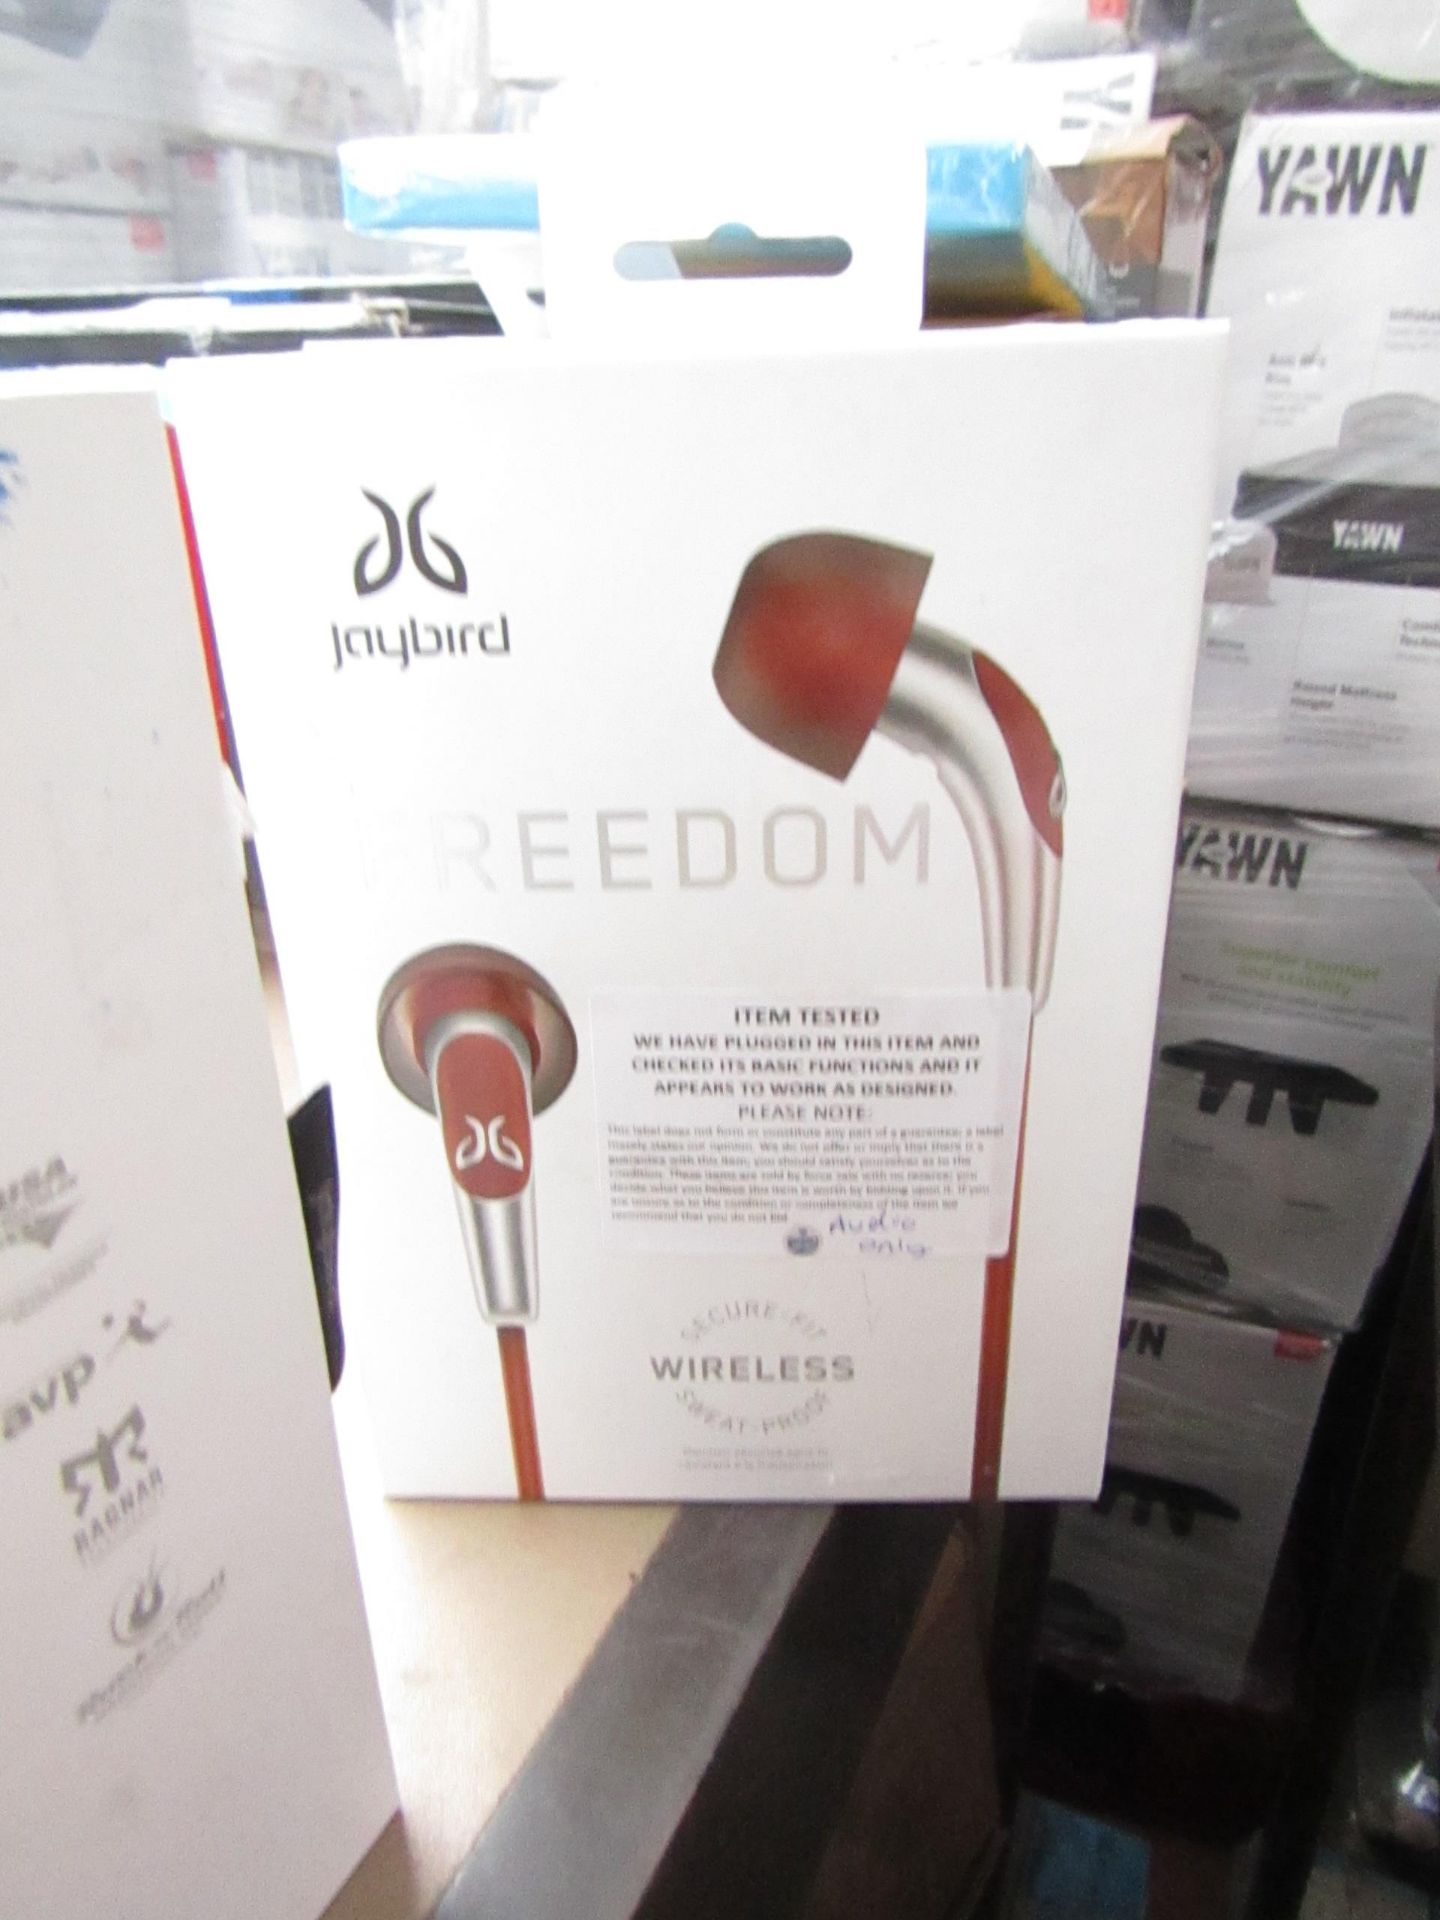 Jaybird Freedom Wireless Earphones, tested working for audio only, mic untested. Boxed.